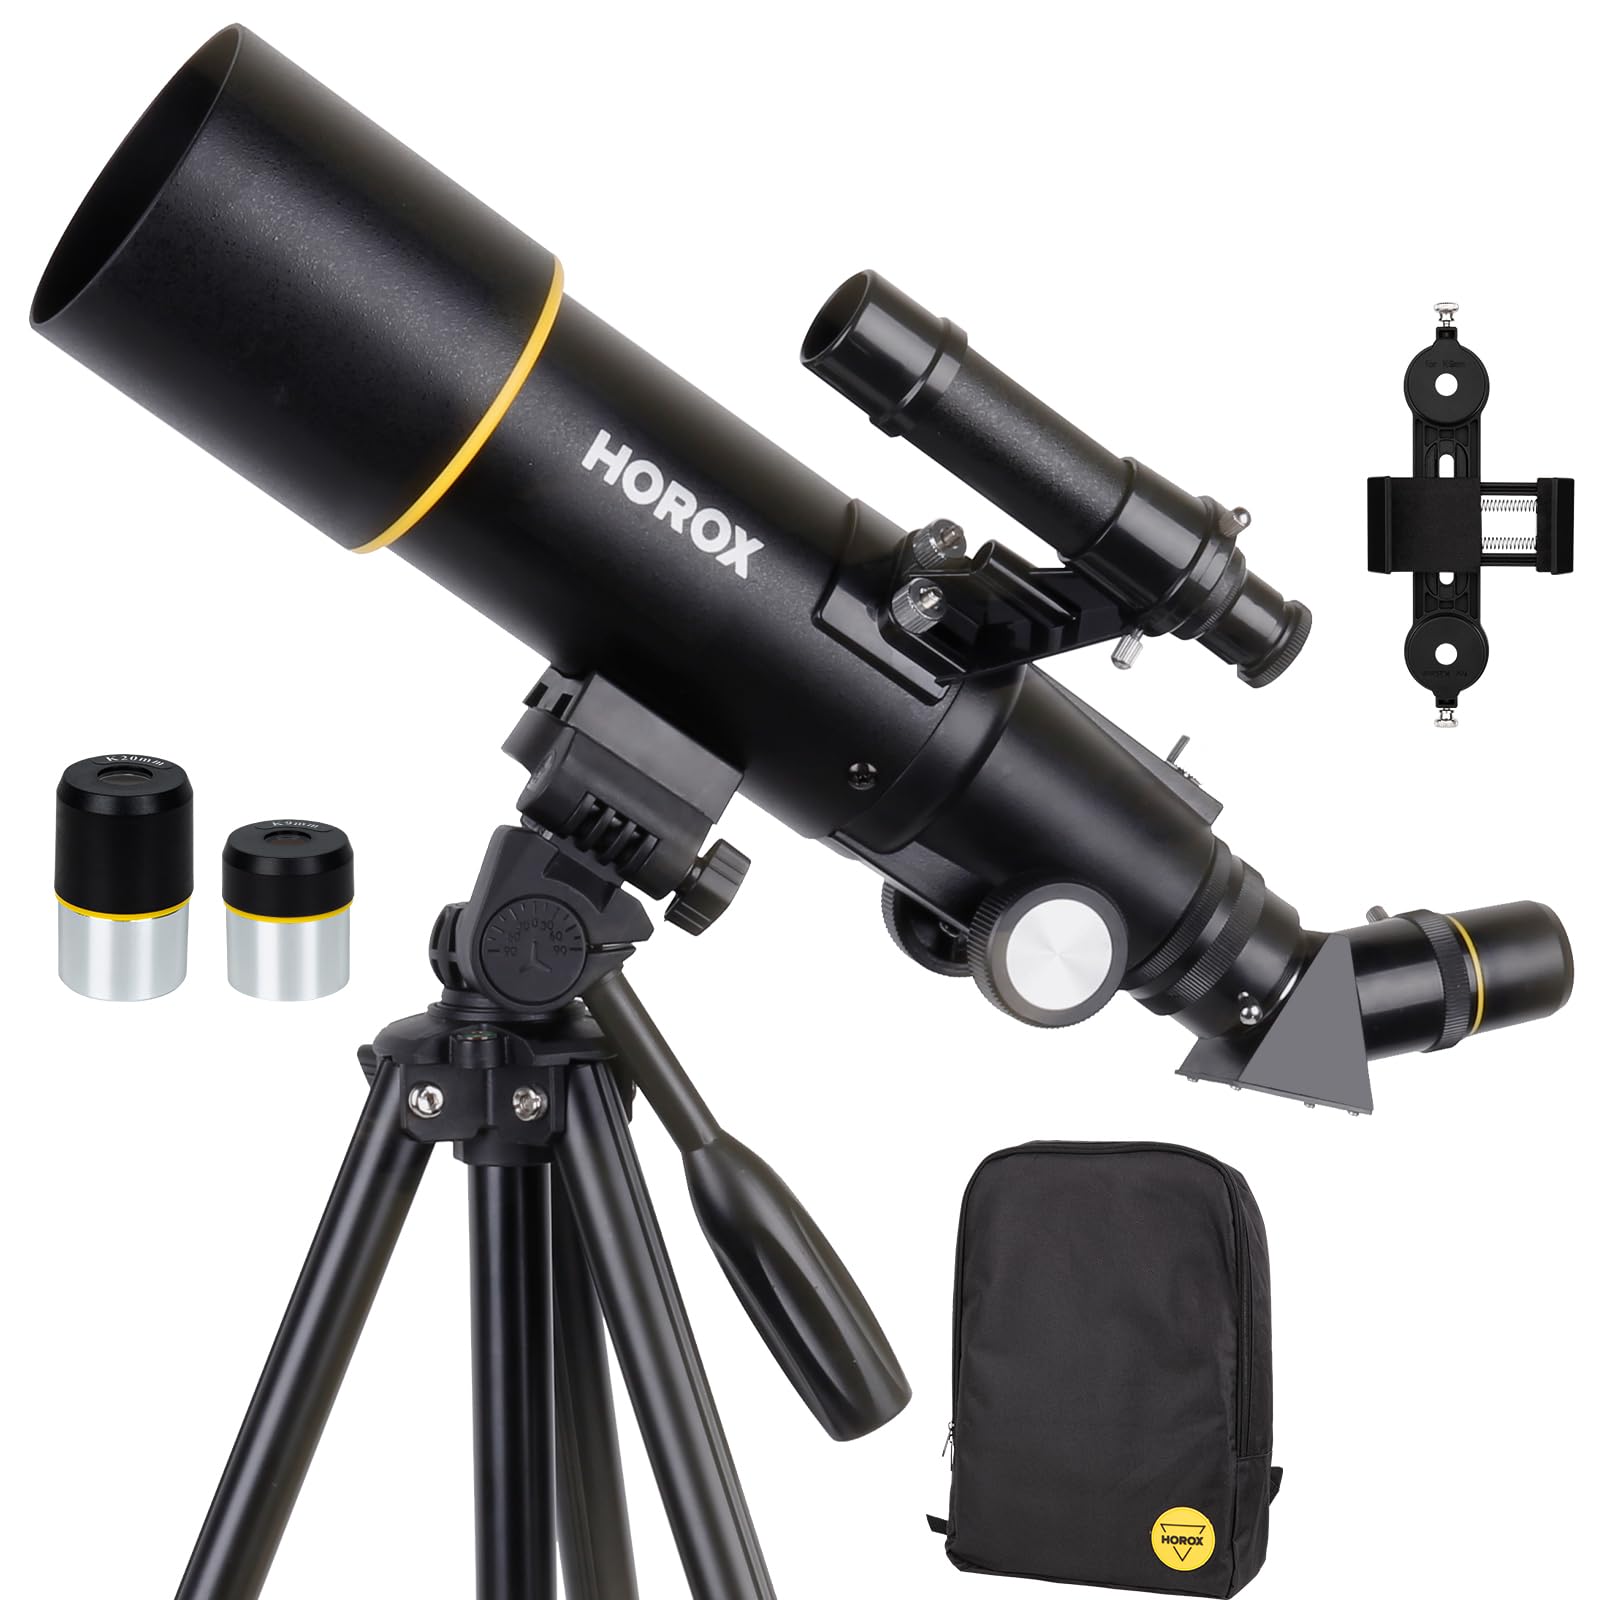 HOROX Telescope, 70mm Aperture 400mm Refractor Telescope for Astronomy, Telescope for Adults. Pro Tripod & Phone Adapter, Portable Telescopes Backpack